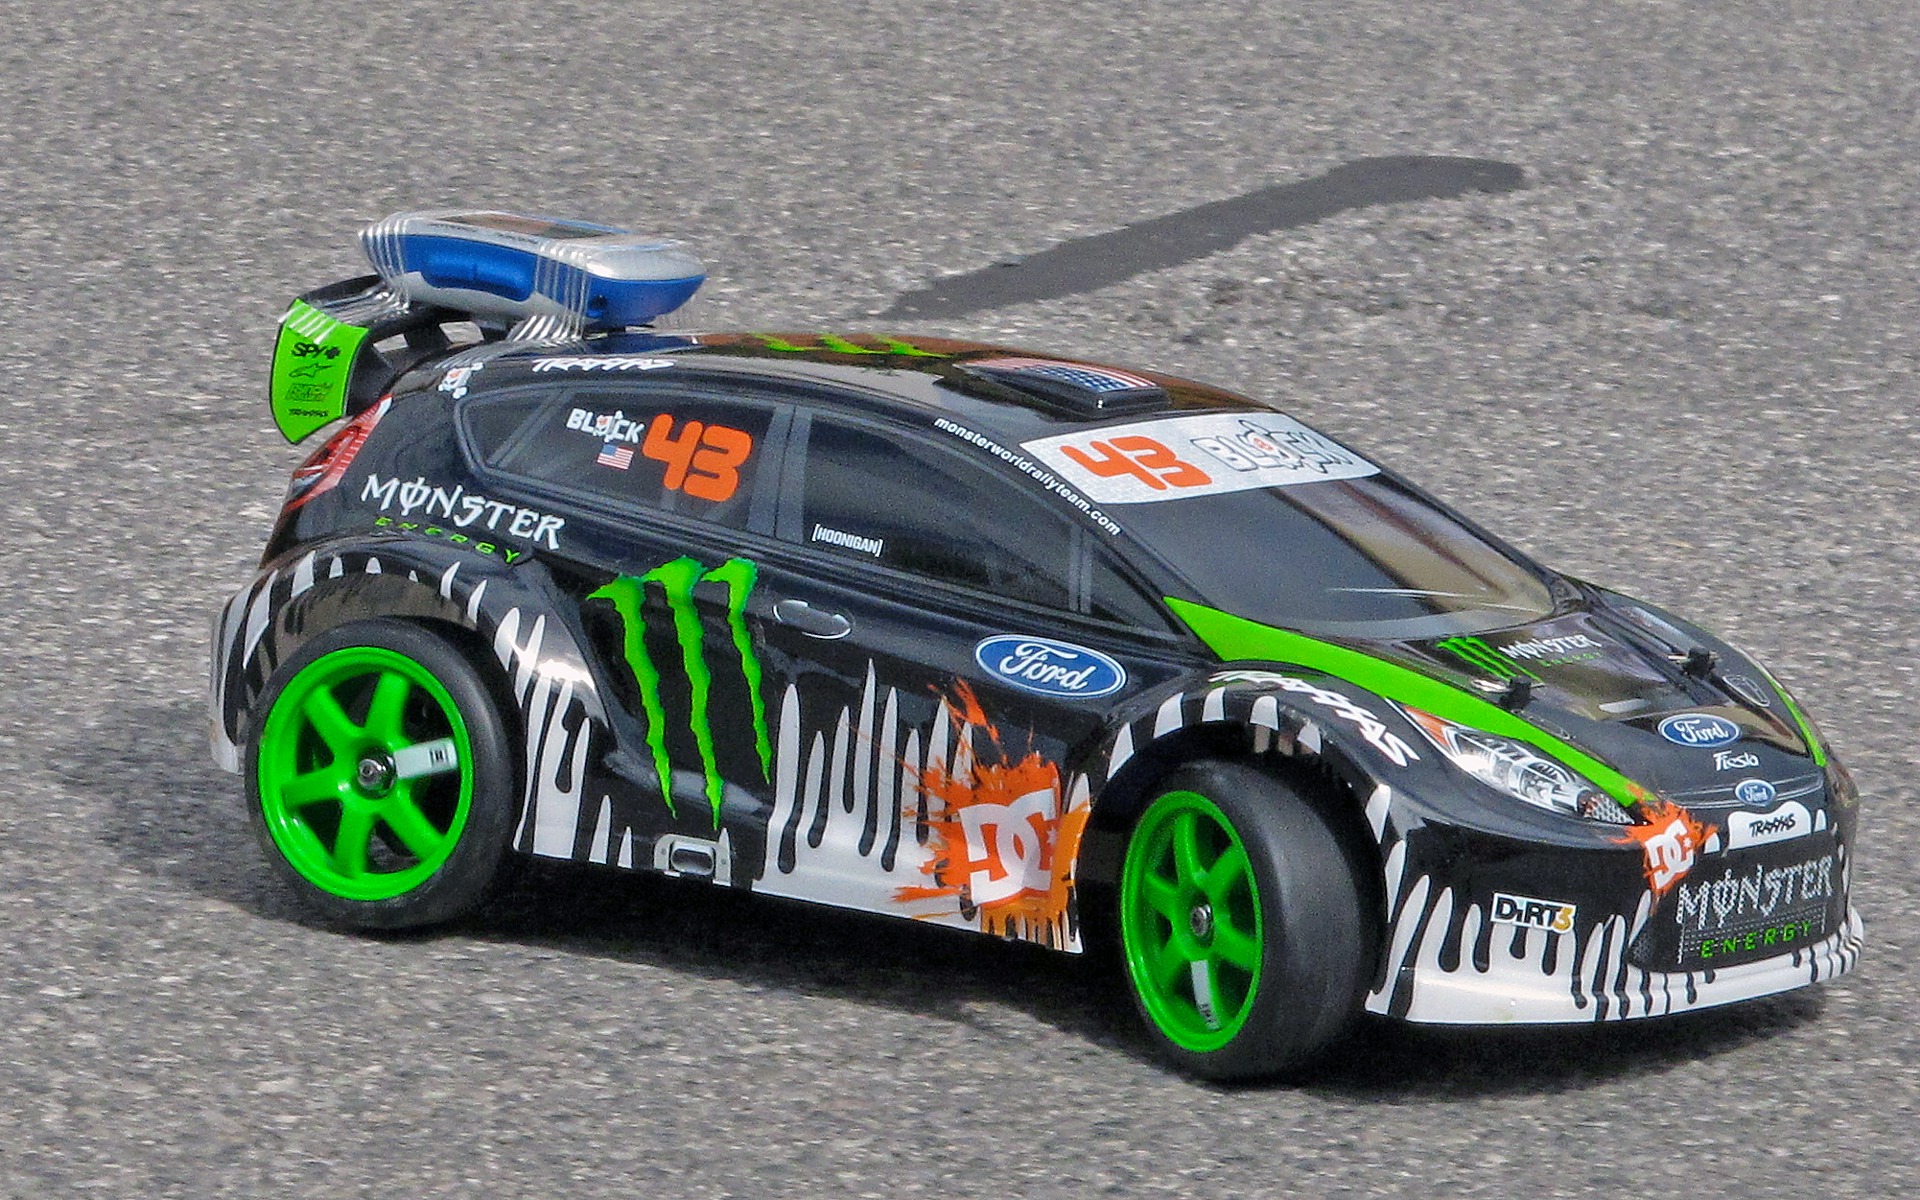 radio, Controlled, Ford, Fiesta, Race, Racing, Tuning, Monster Wallpaper